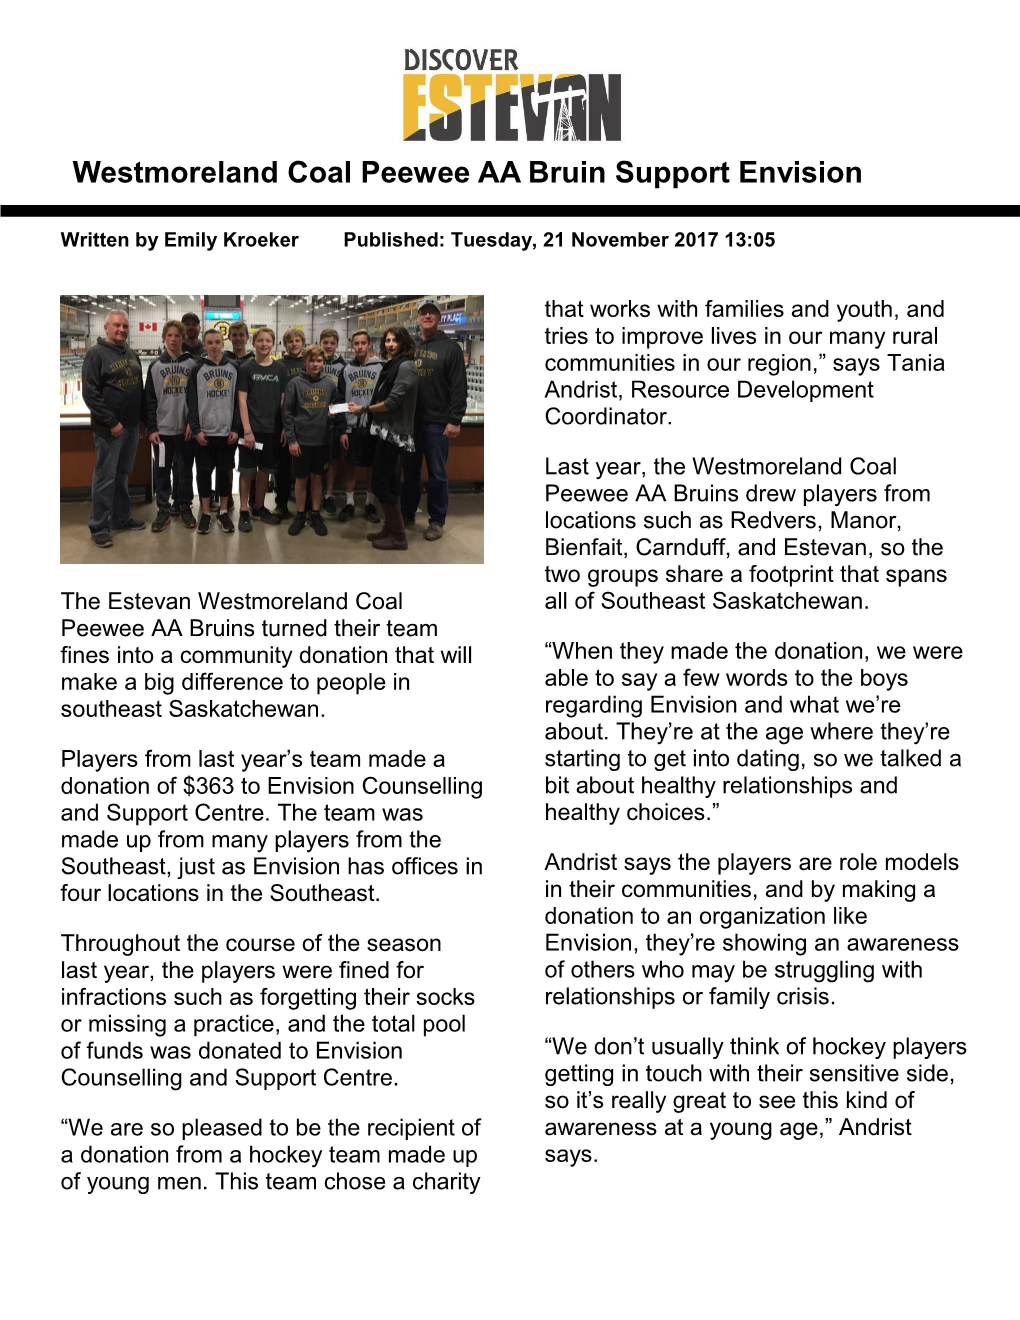 Westmoreland Coal Peewee AA Bruin Support Envision